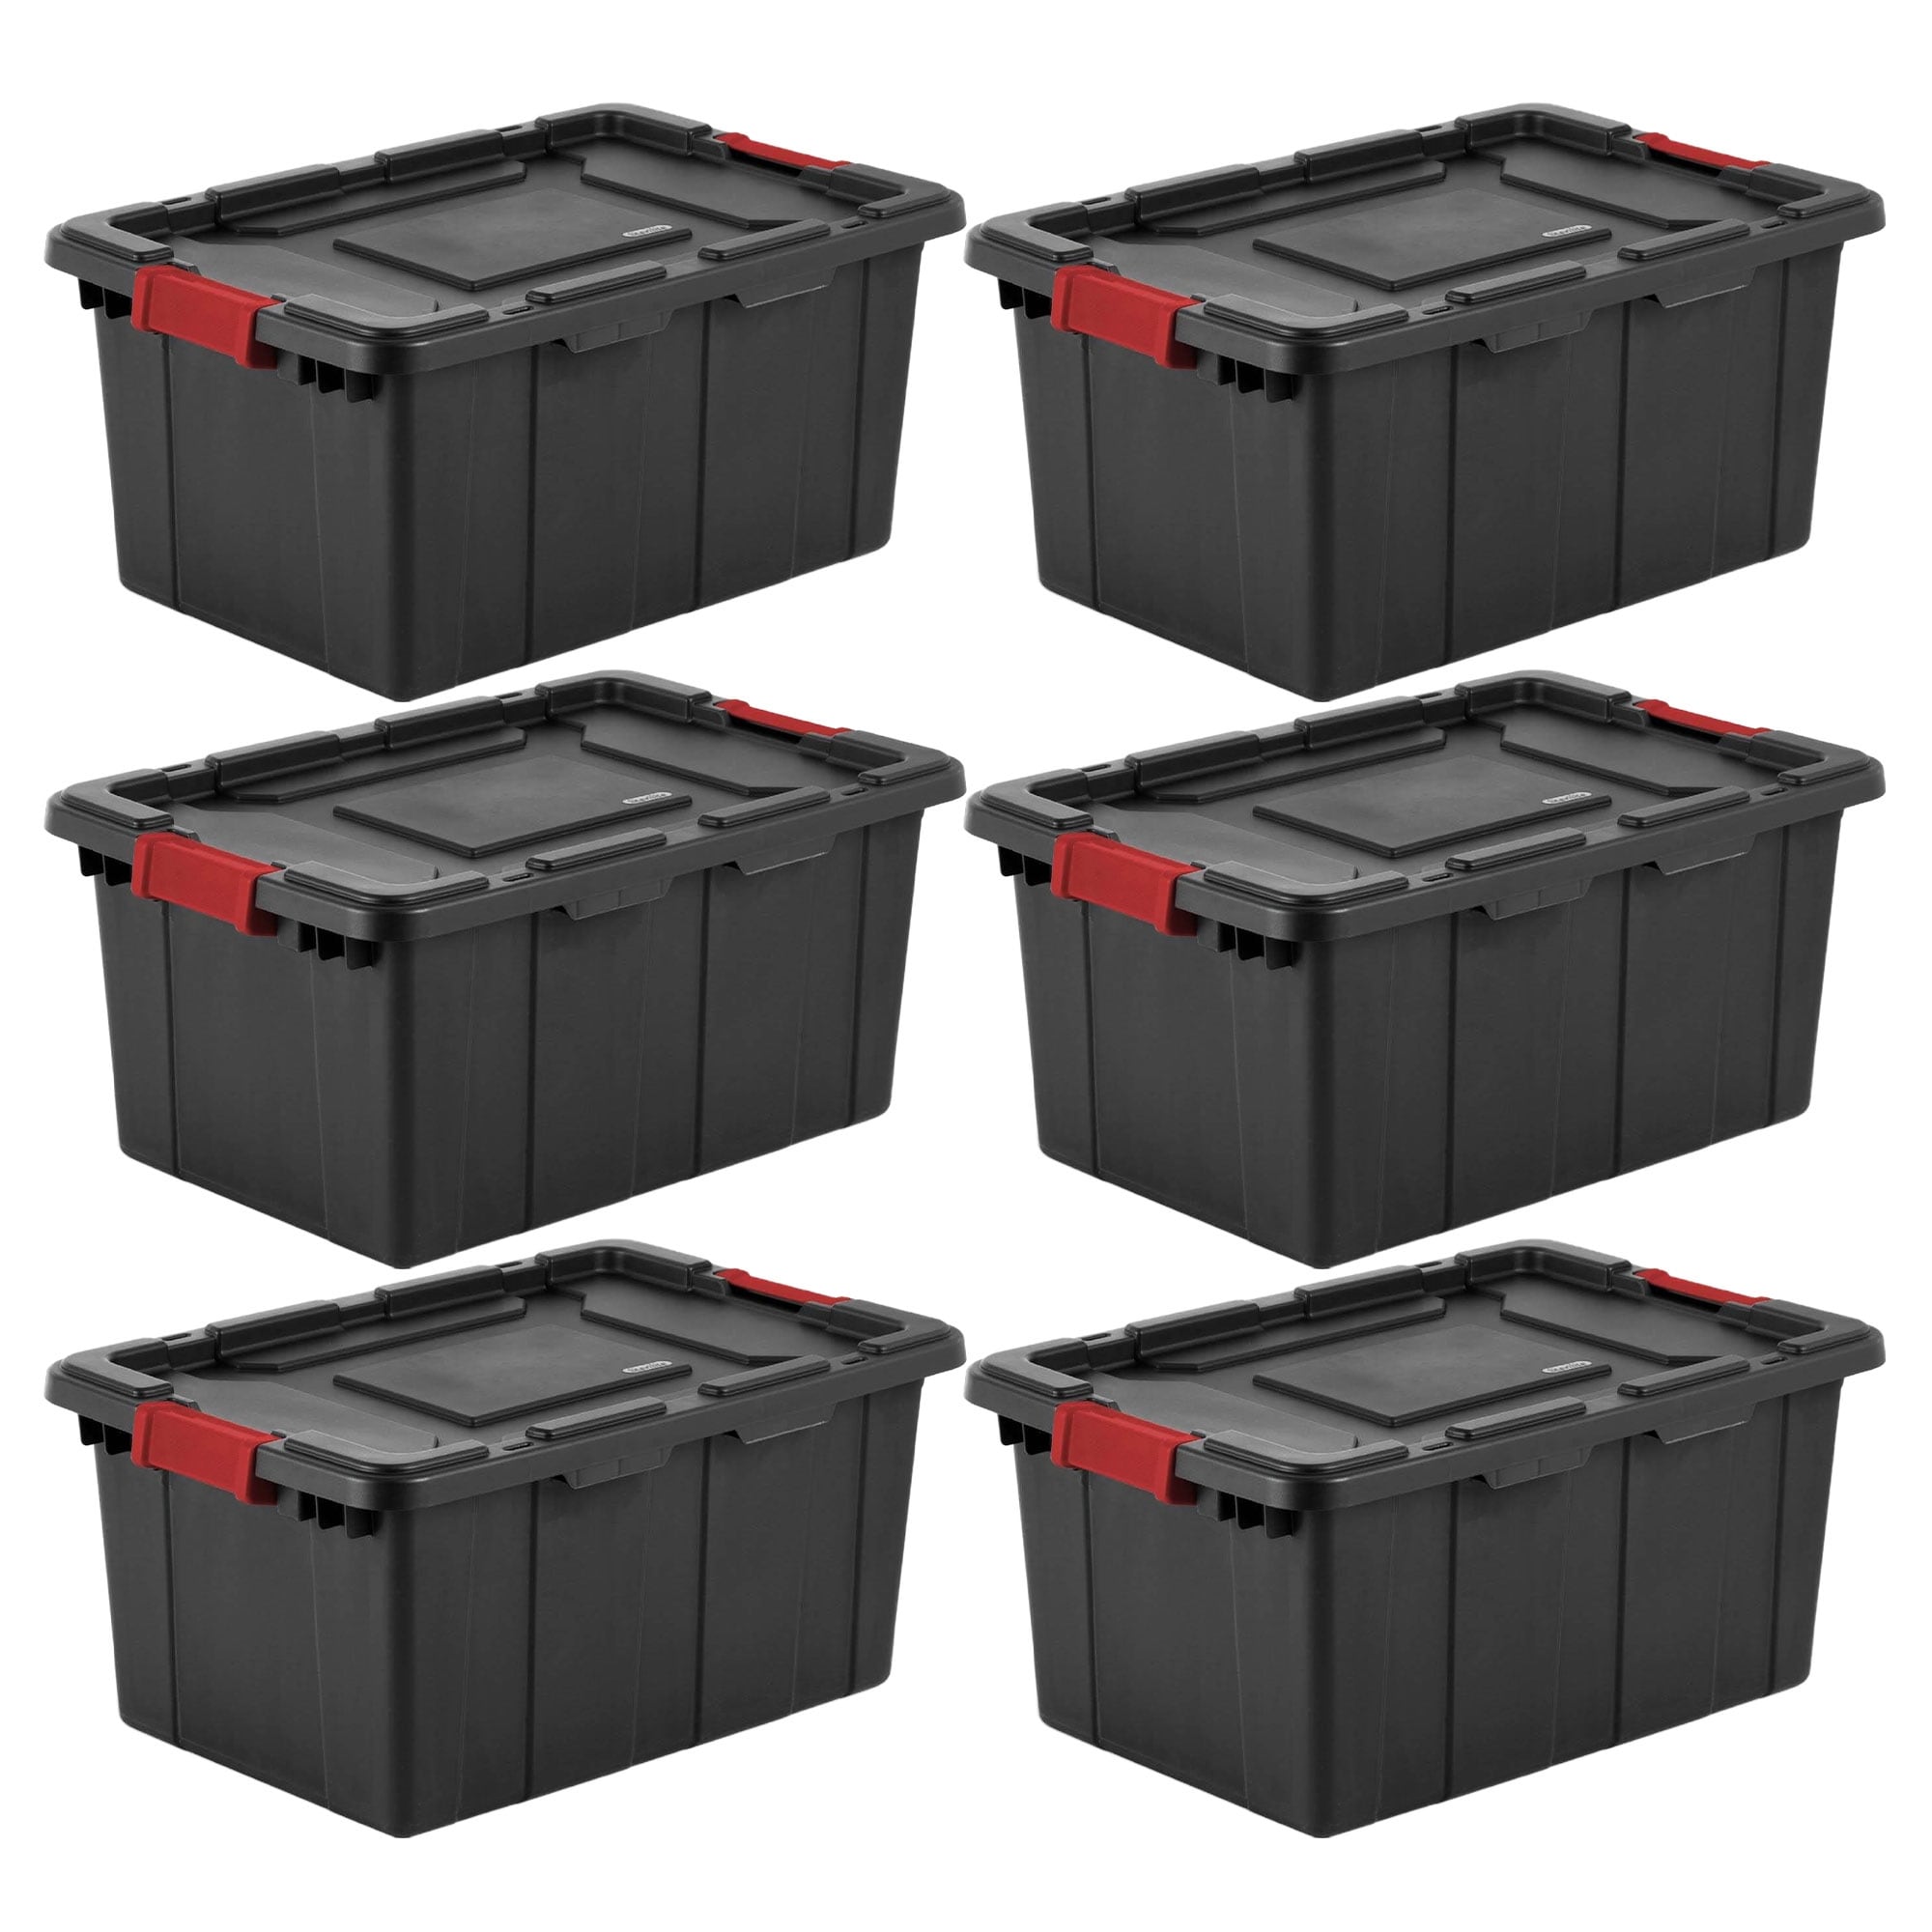 https://ak1.ostkcdn.com/images/products/is/images/direct/6463a2cf26c98370bd351e18fa3462a325884bbe/Sterilite-15-gal-Stackable-Latched-Industrial-Tote-with-Tie-Down-Holes%2C-%286-Pack%29.jpg